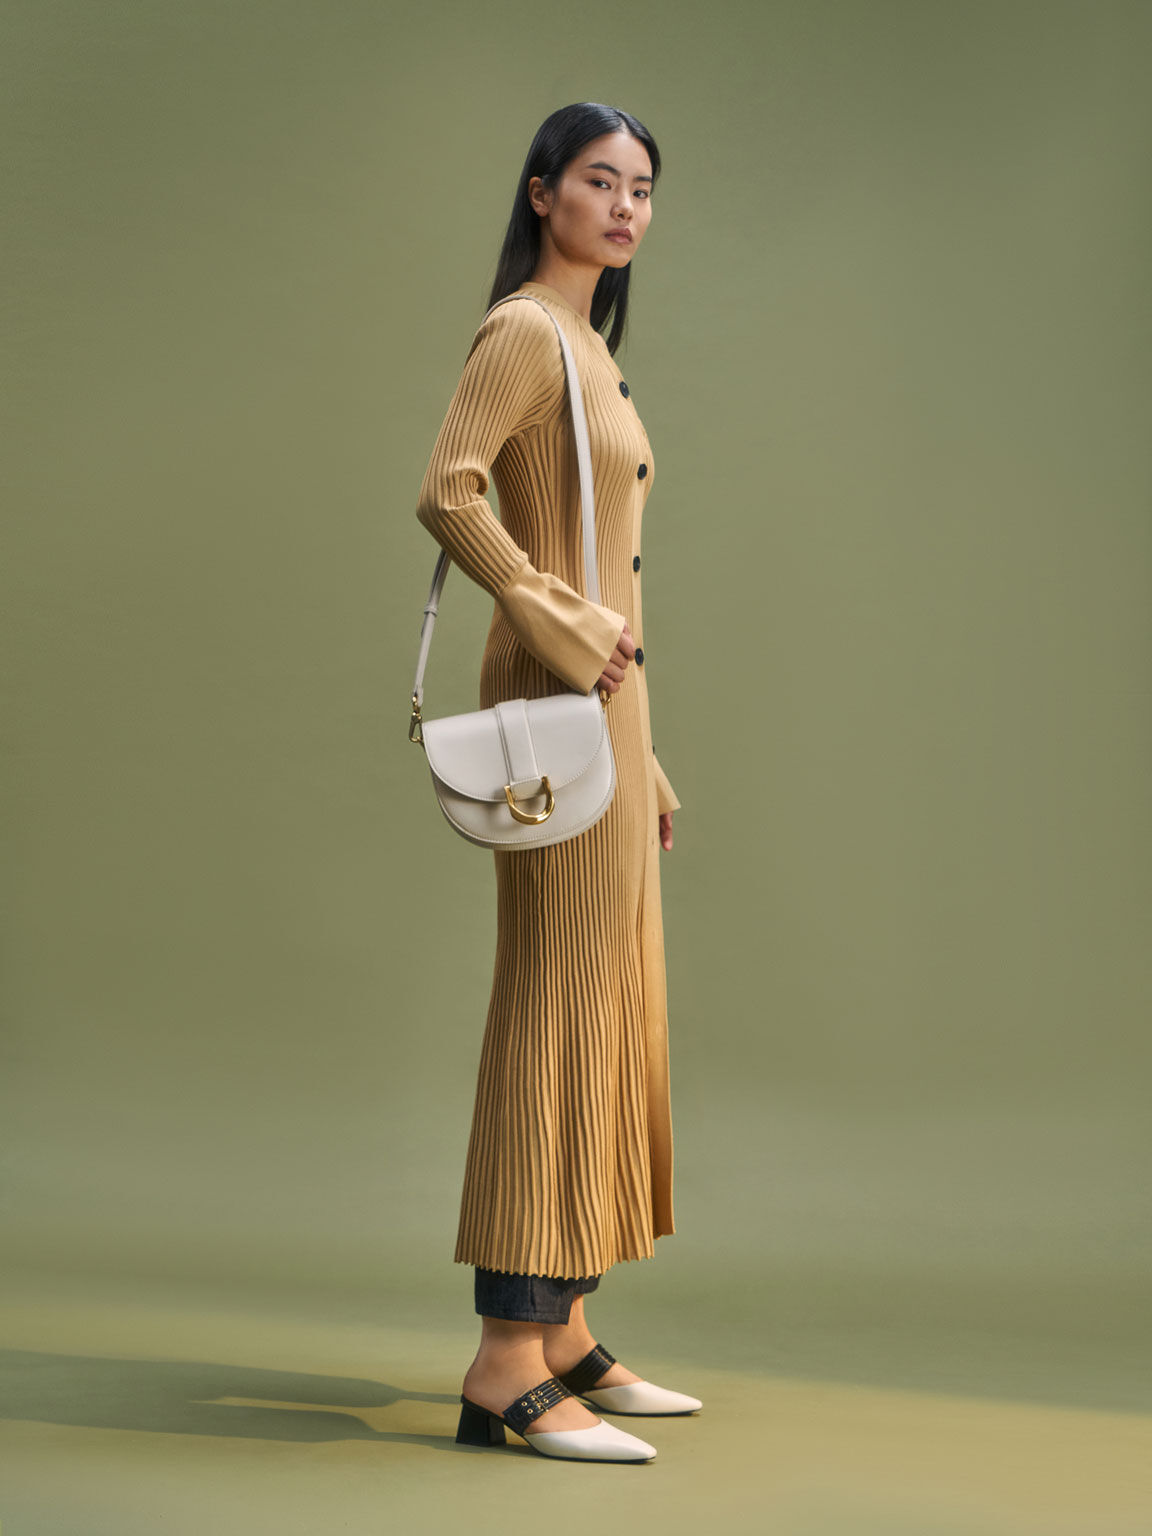 CHARLES & KEITH - Our highly popular Gabine saddle bag is back this season  in new colours, including dark green and mustard. Shop now: Gabine saddle  bag -  (Credit: Pingping, @pingvibes) #